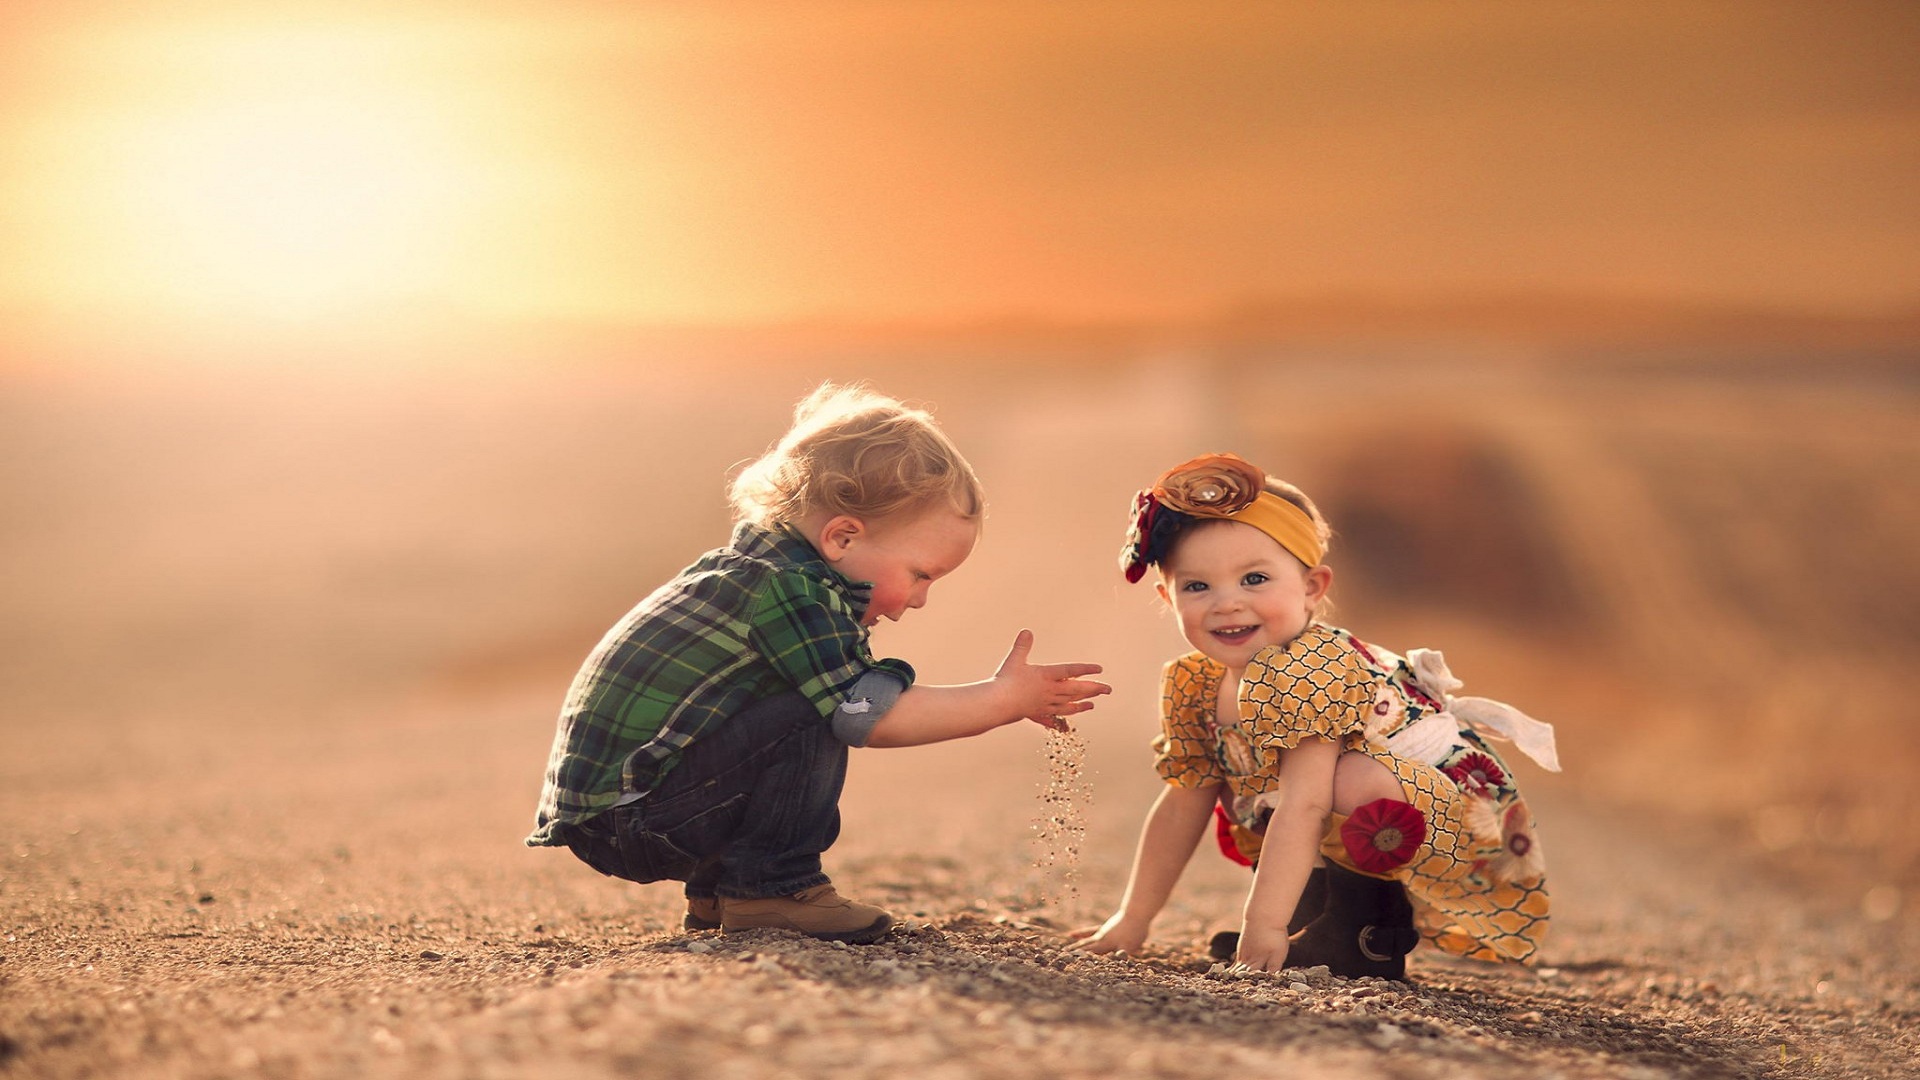 Small and Cute Baby Wallpaper download (20)